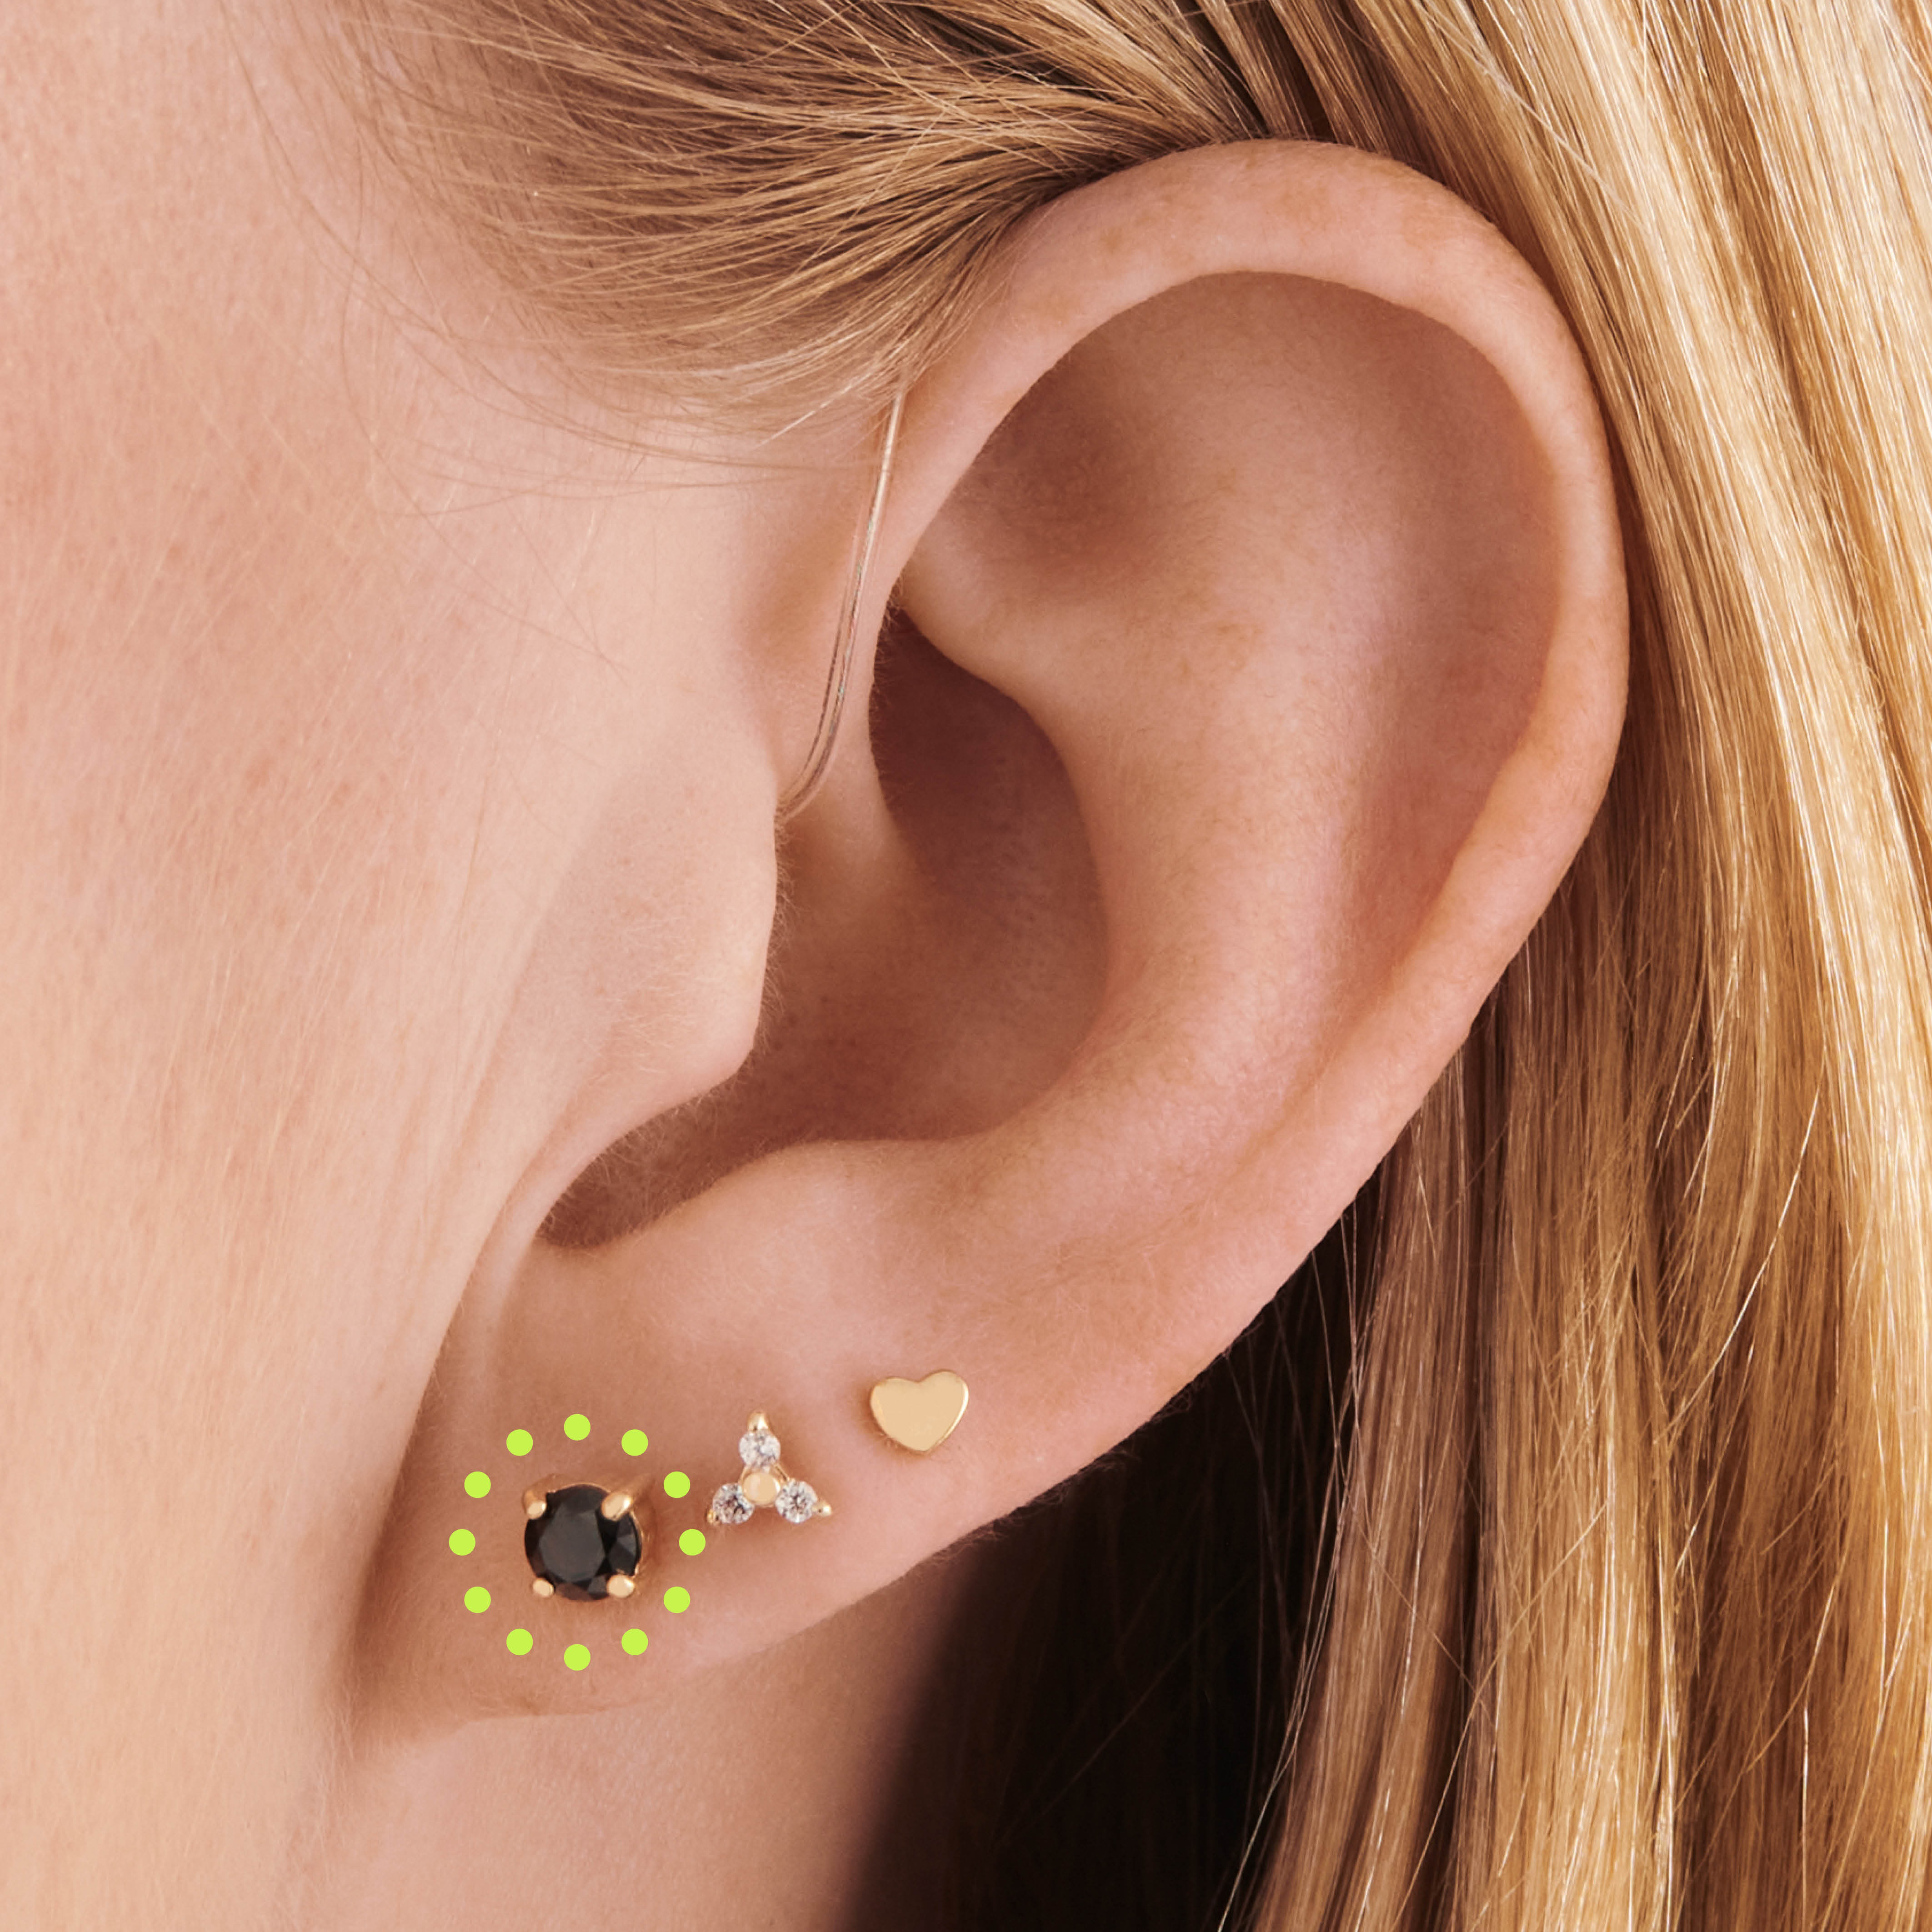 An image of an ear with the first lobe piercing circled.